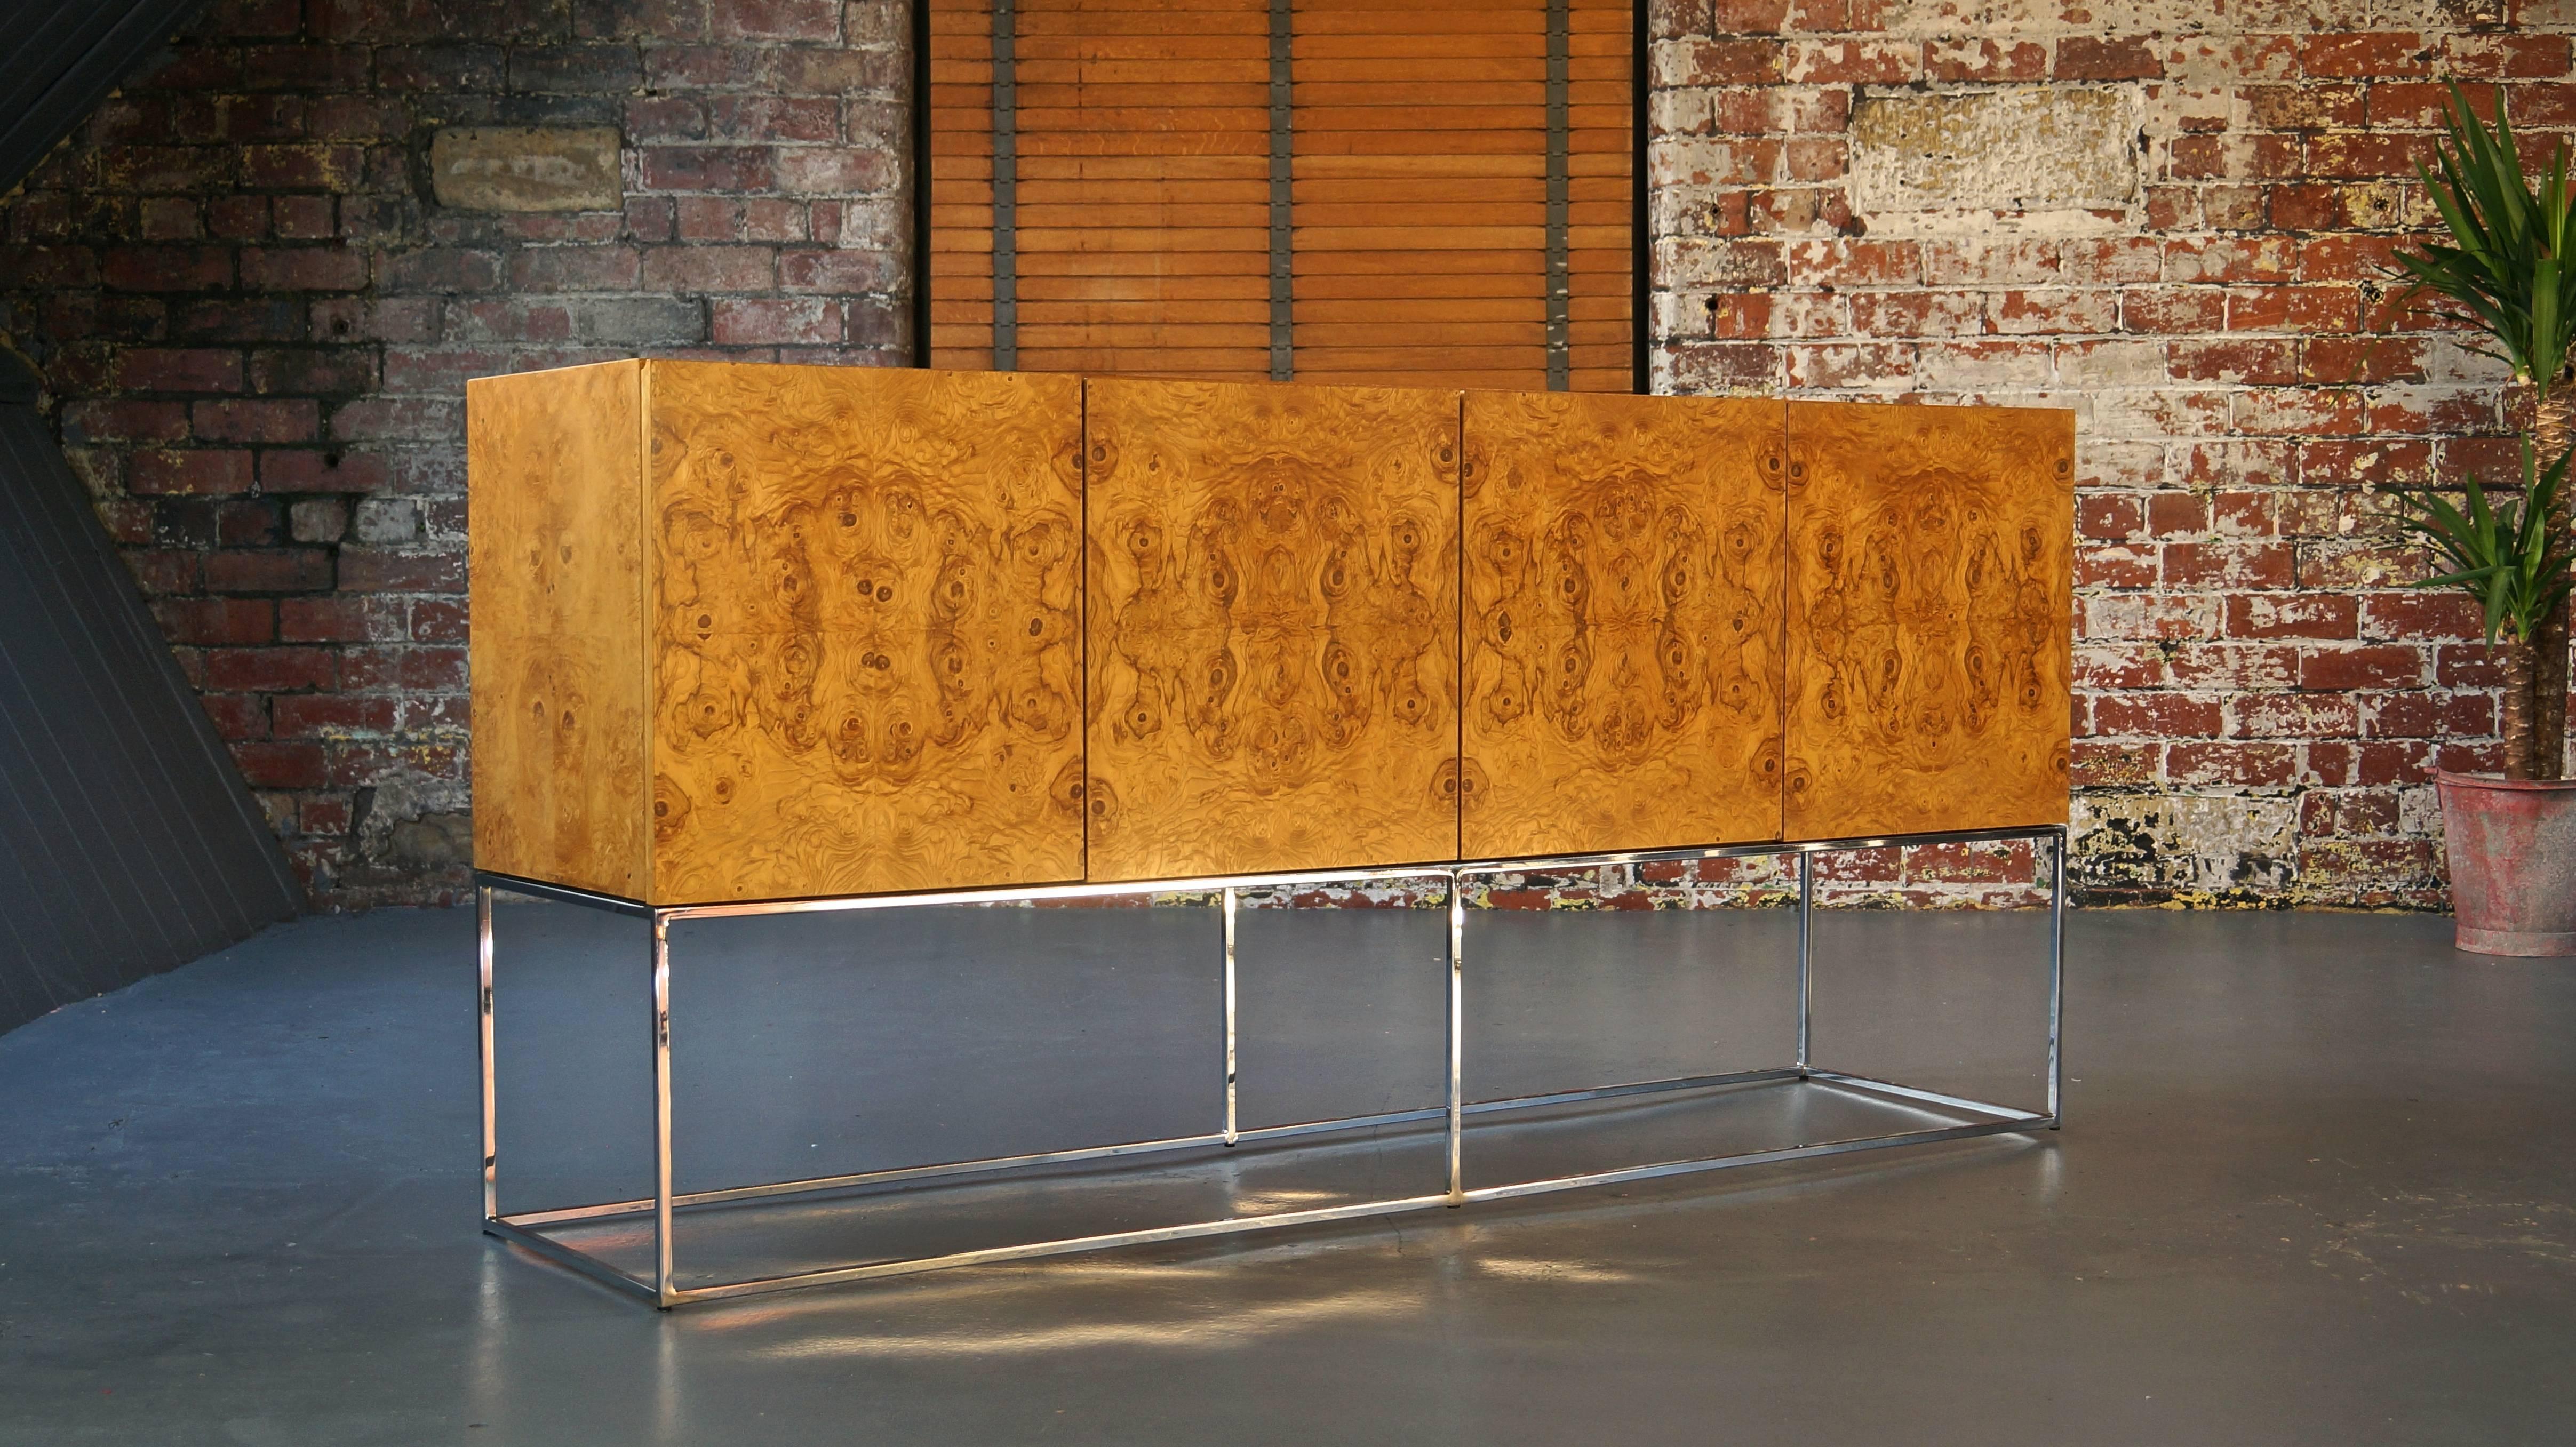 Beautiful Milo Baughman sideboard / credenza for Thayer Coggin

Book matched burl wood, resting on elegantly slim chromed steel base. 

This piece is a beautiful Mid-Century Modern 1970s statement piece from one of the masters of American